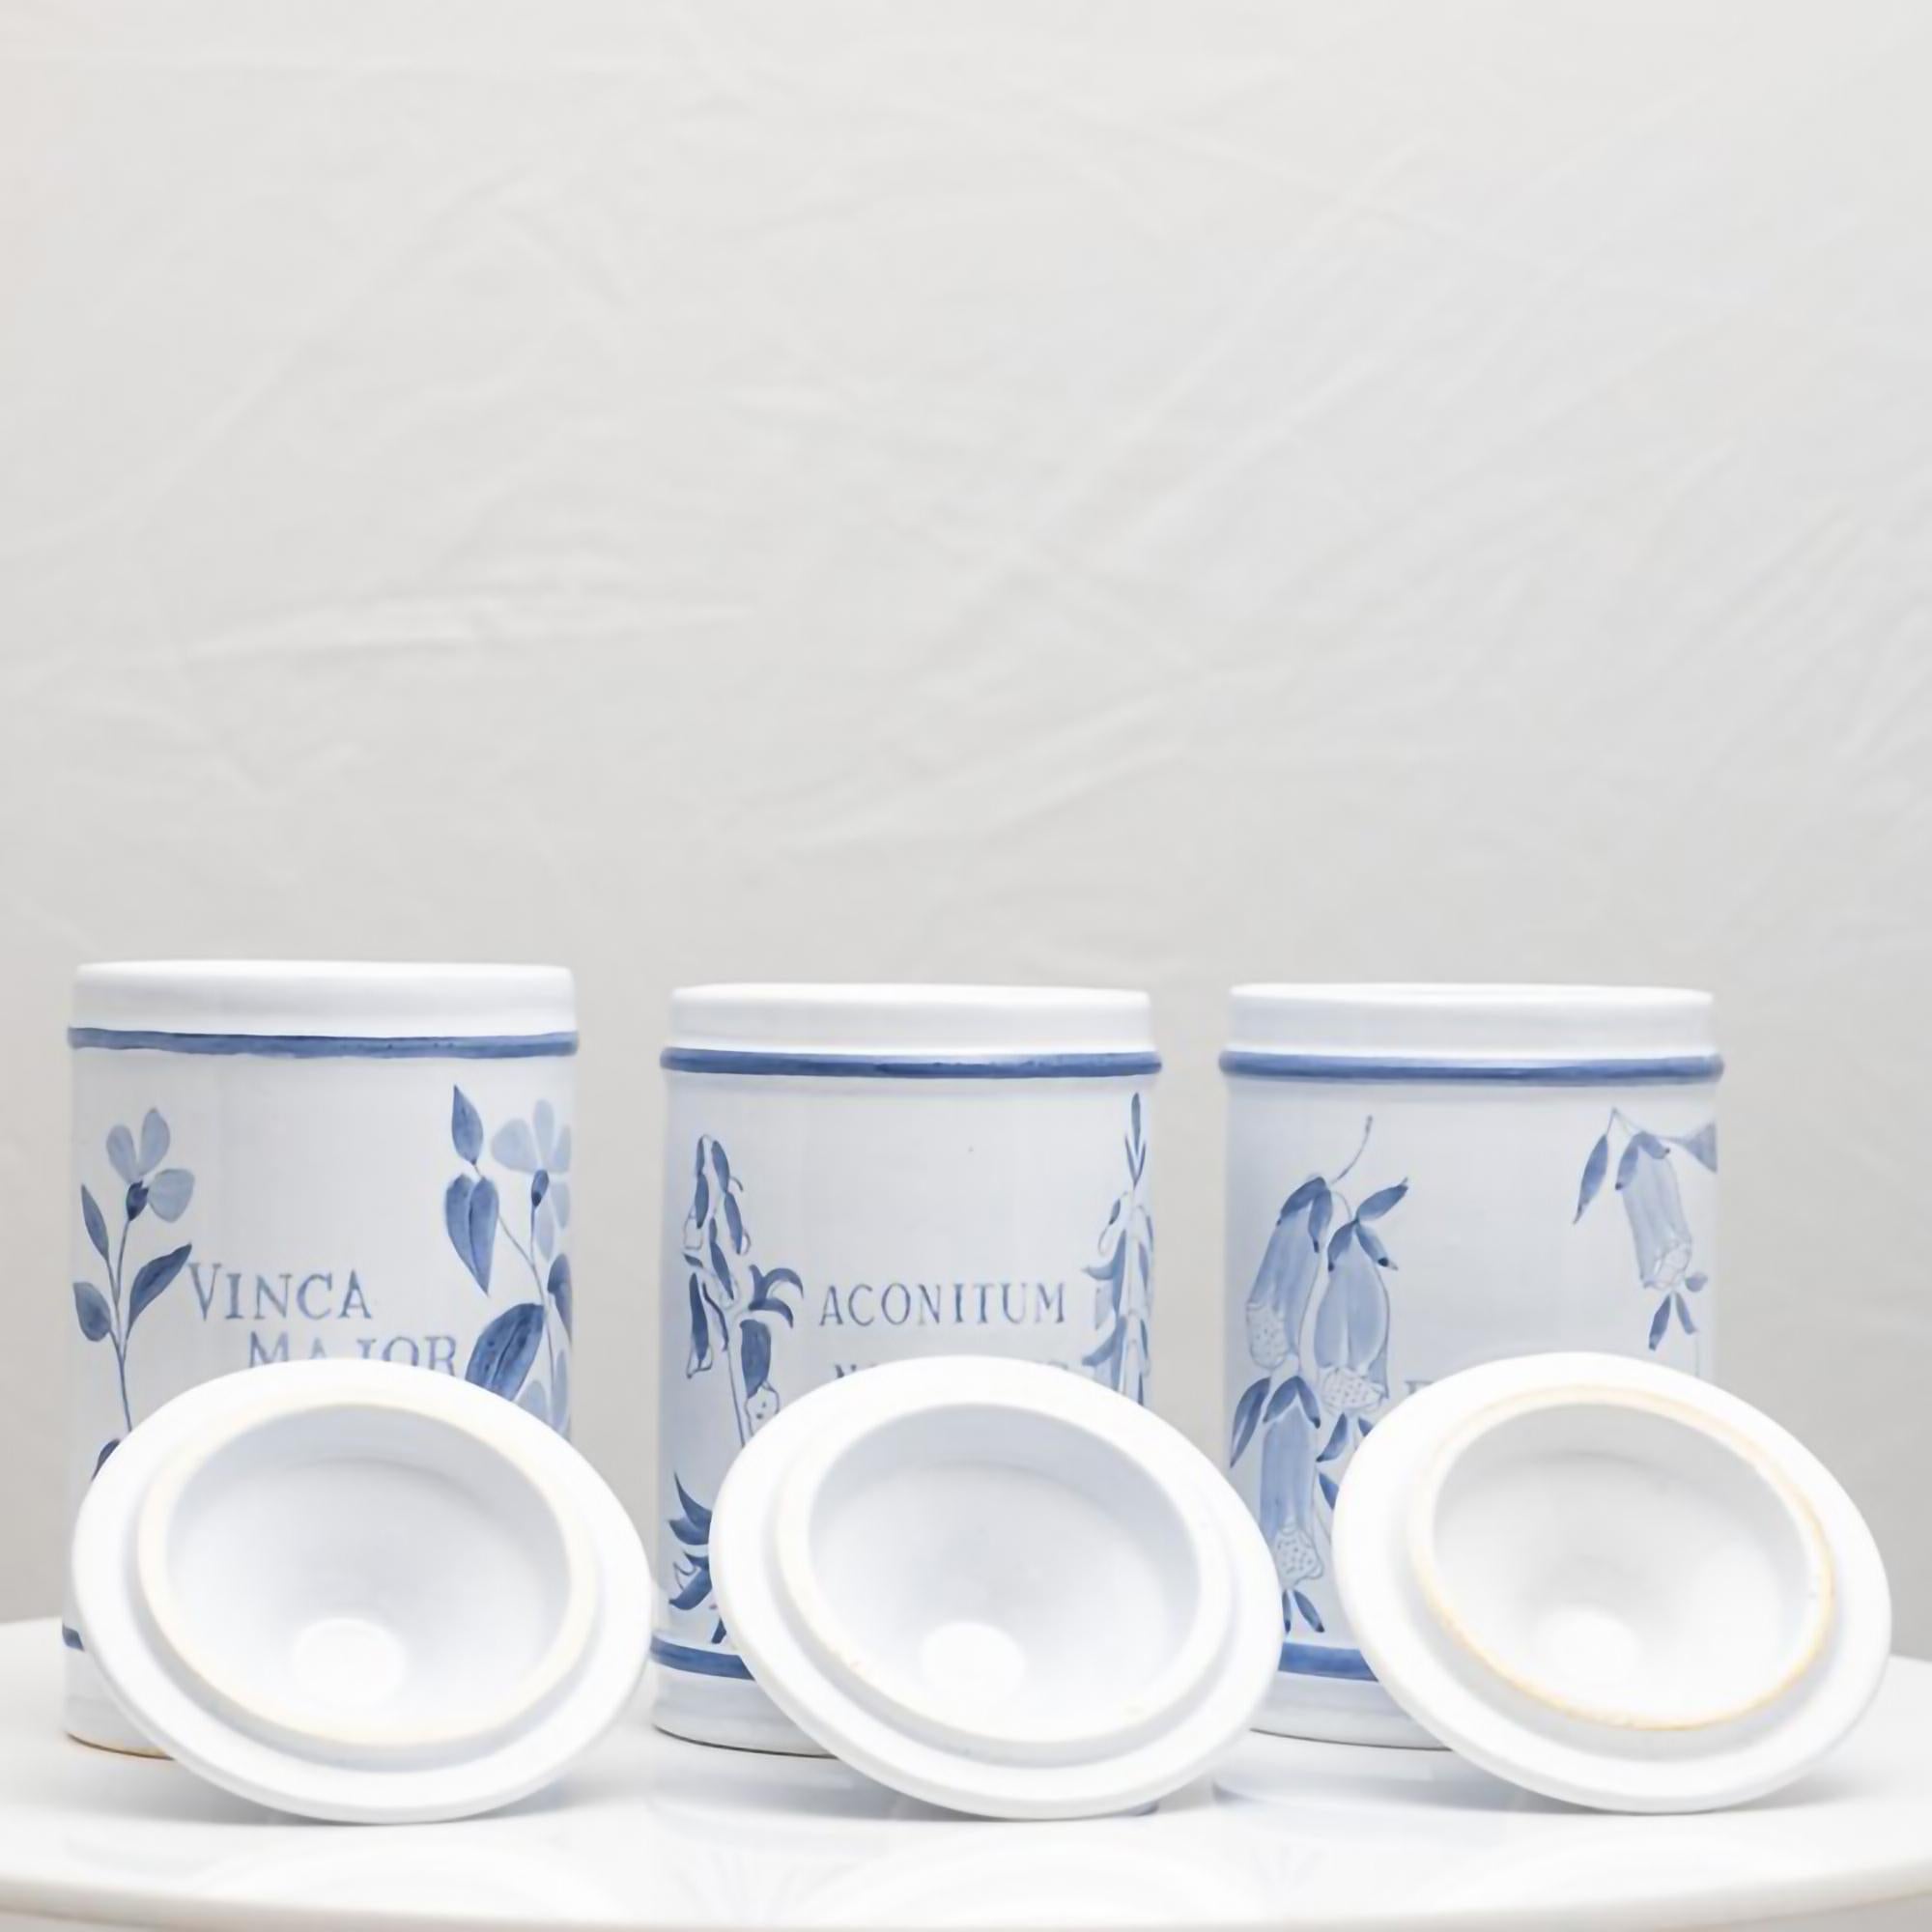 This set of three original Longchamp vintage porcelain apothecary jars are in excellent condition. Longchamp was established in Burgundy, France, in 1832. The jars are hand-painted in blue on white porcelain. Not only the name of the herb or drug is